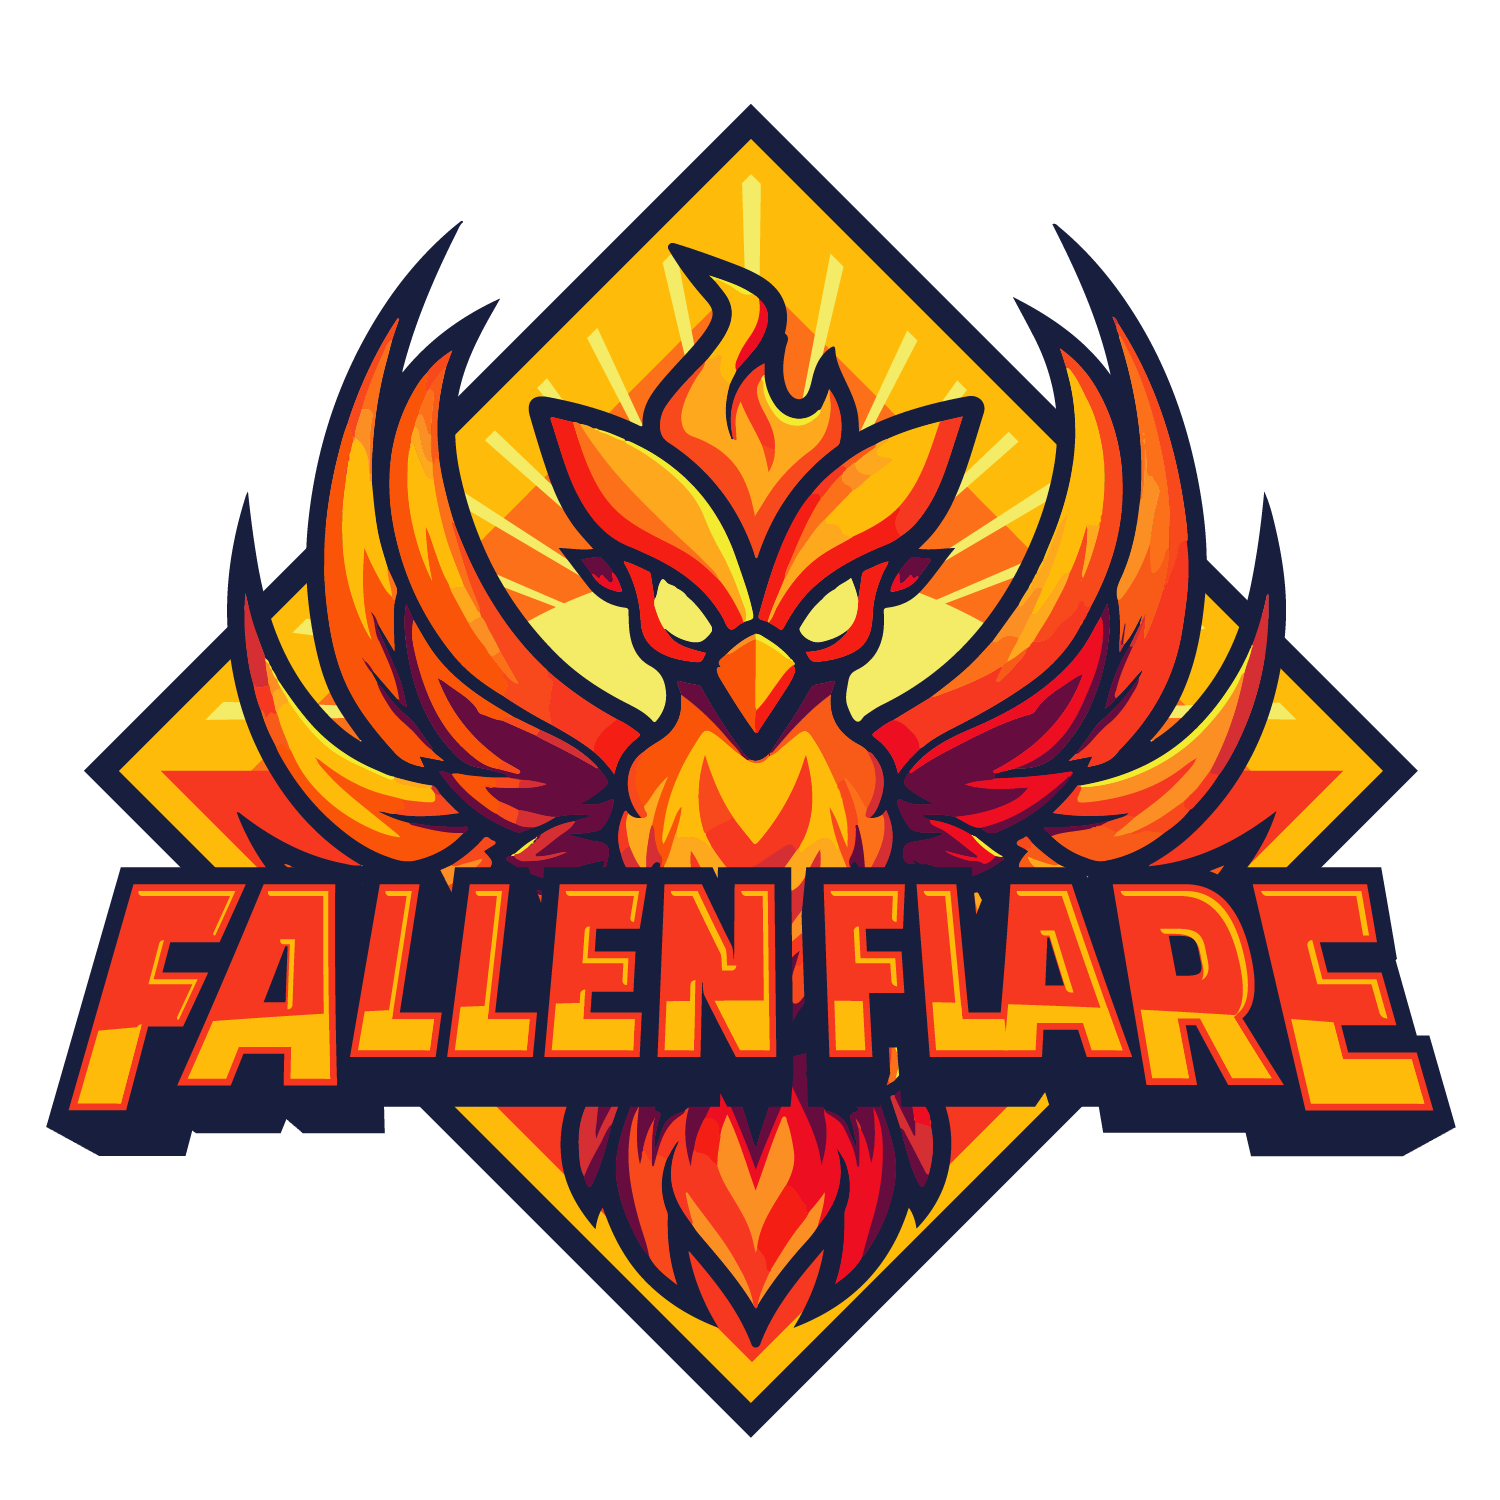 FallenFlare